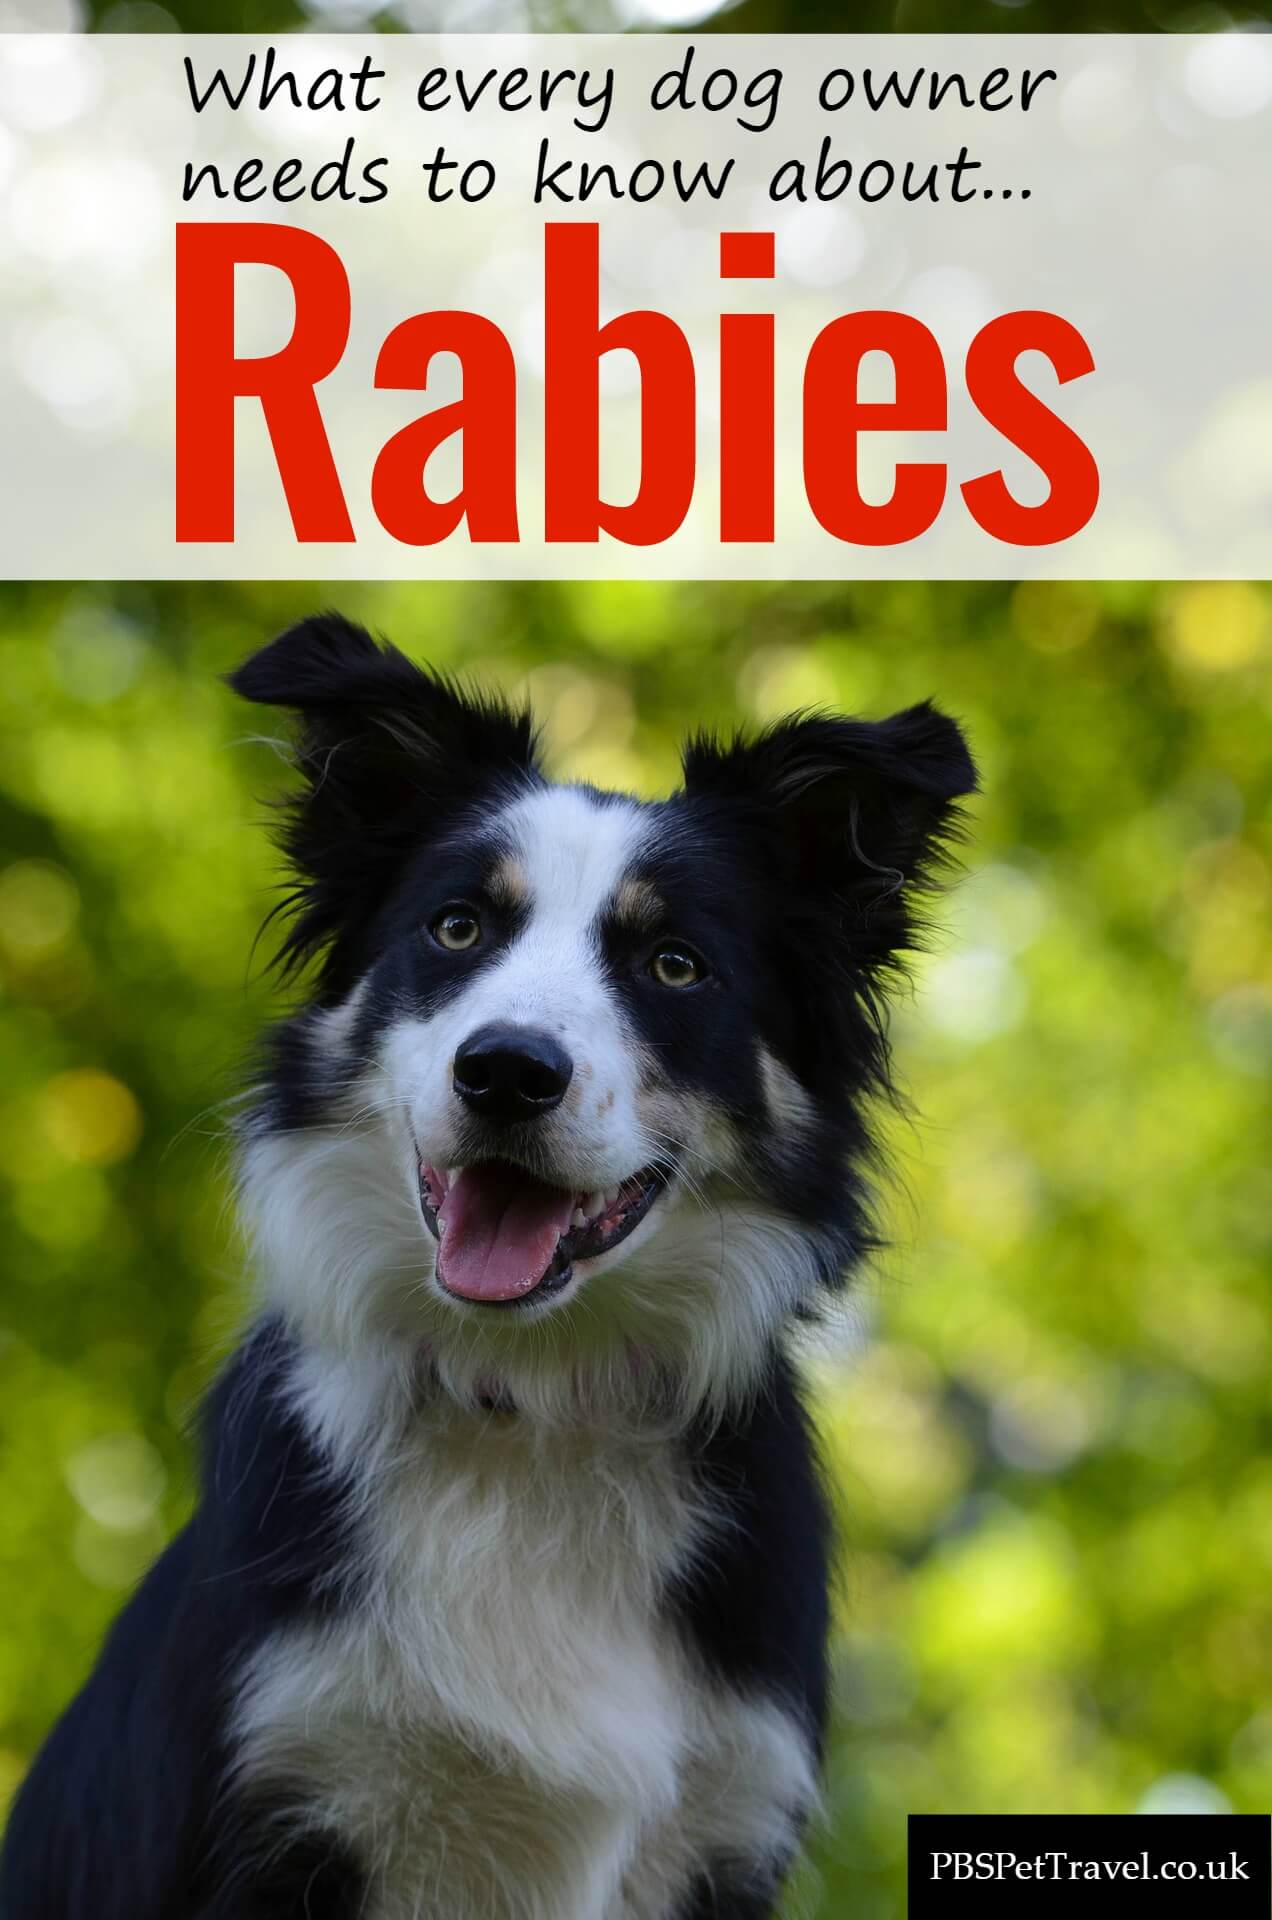 how long does a dog live if it has rabies